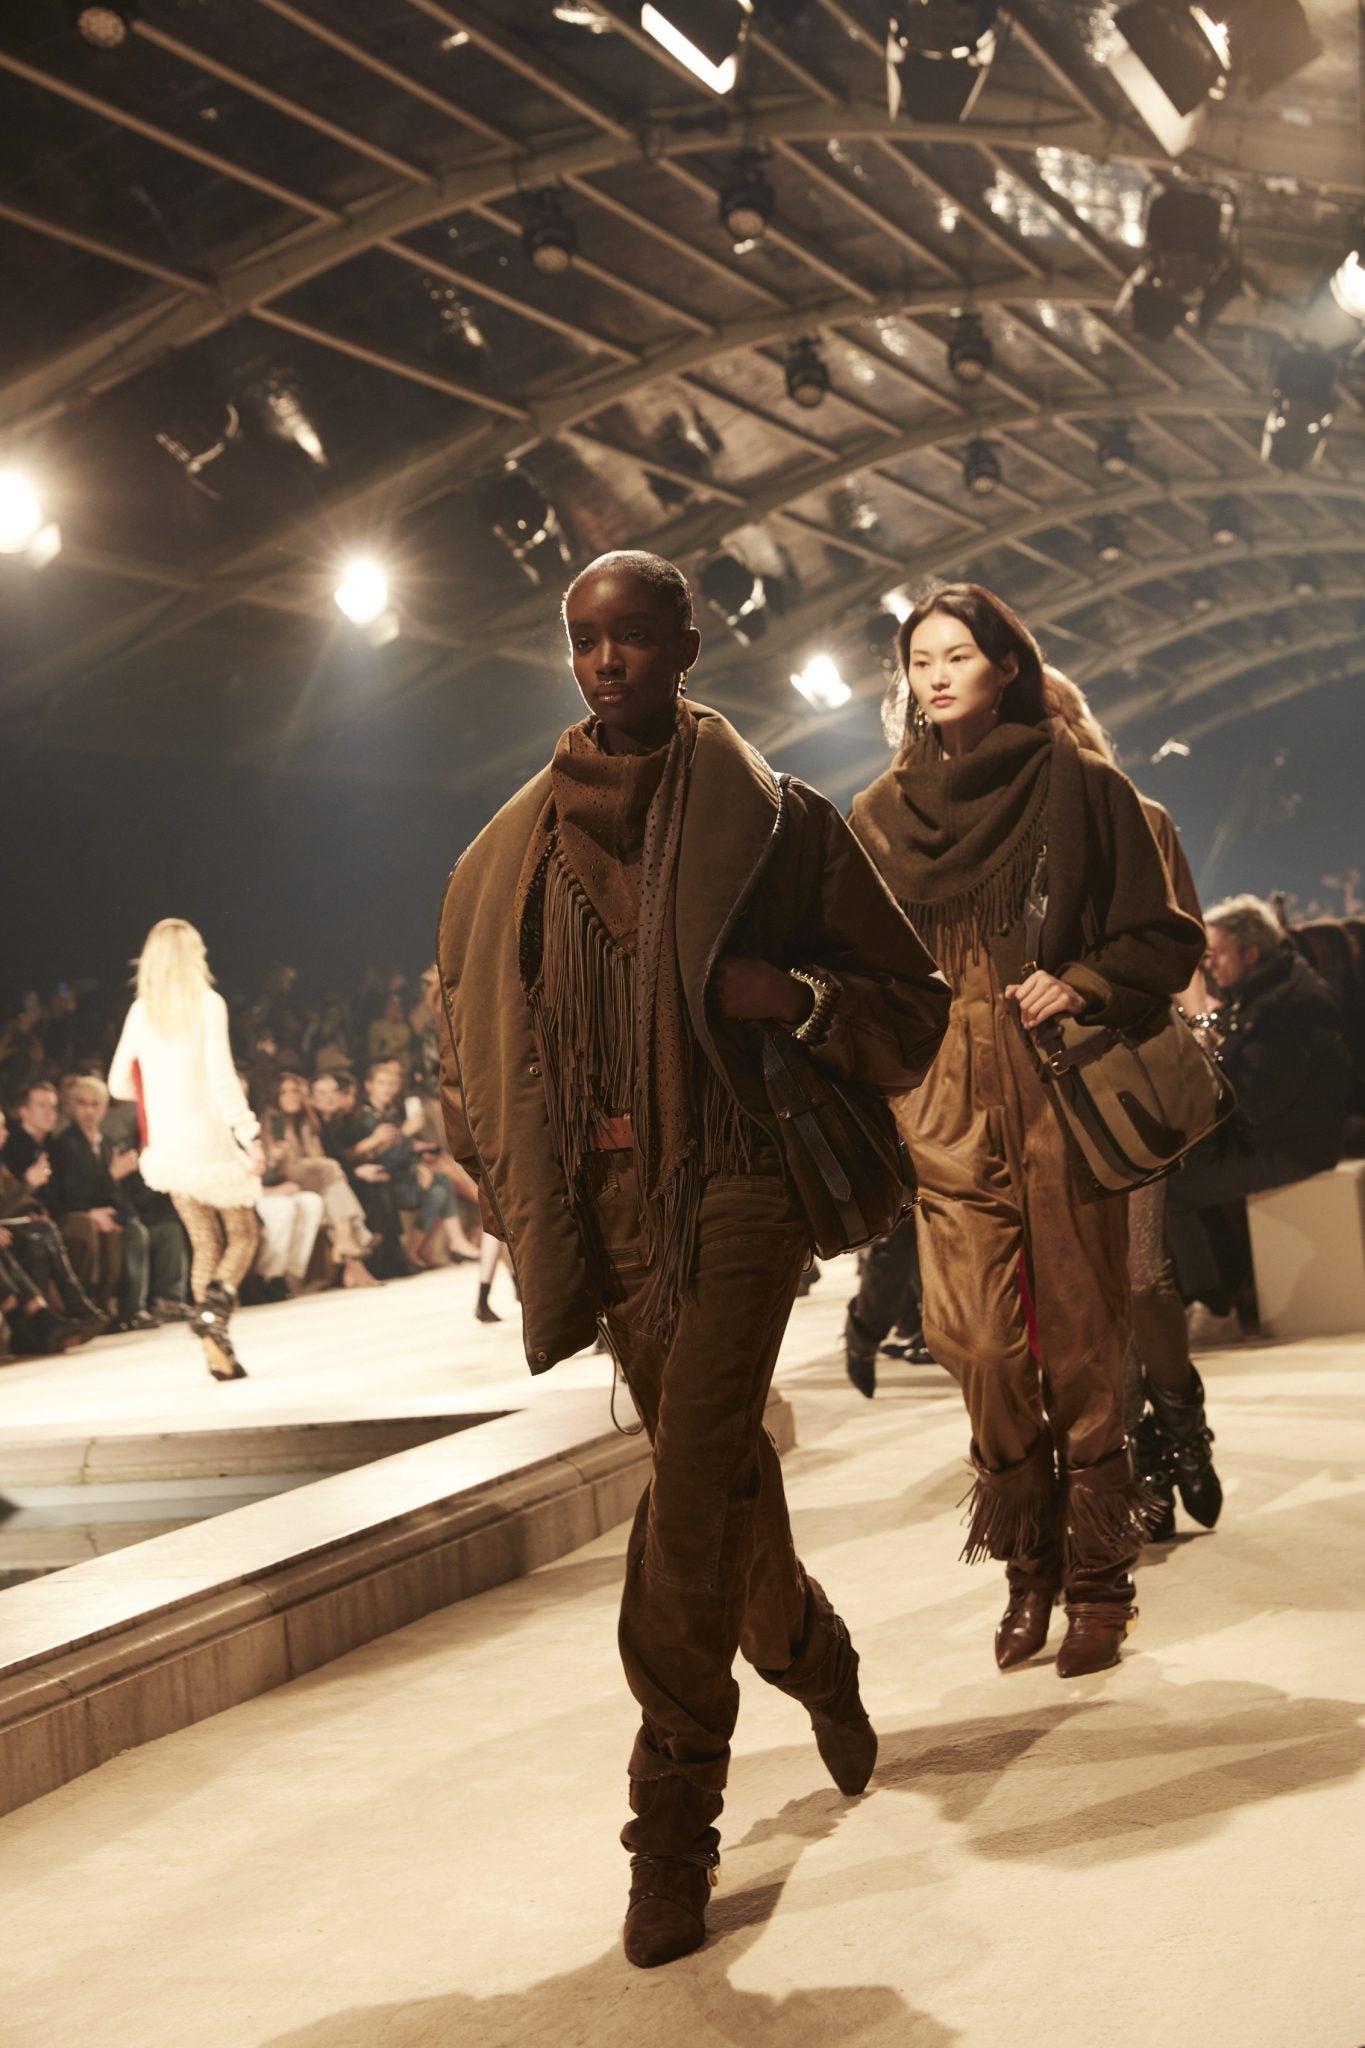 Two female models on catwalk dressed in shades of brown, both wearing fringed scarves, carrying messenger bags and wearing brown boots.